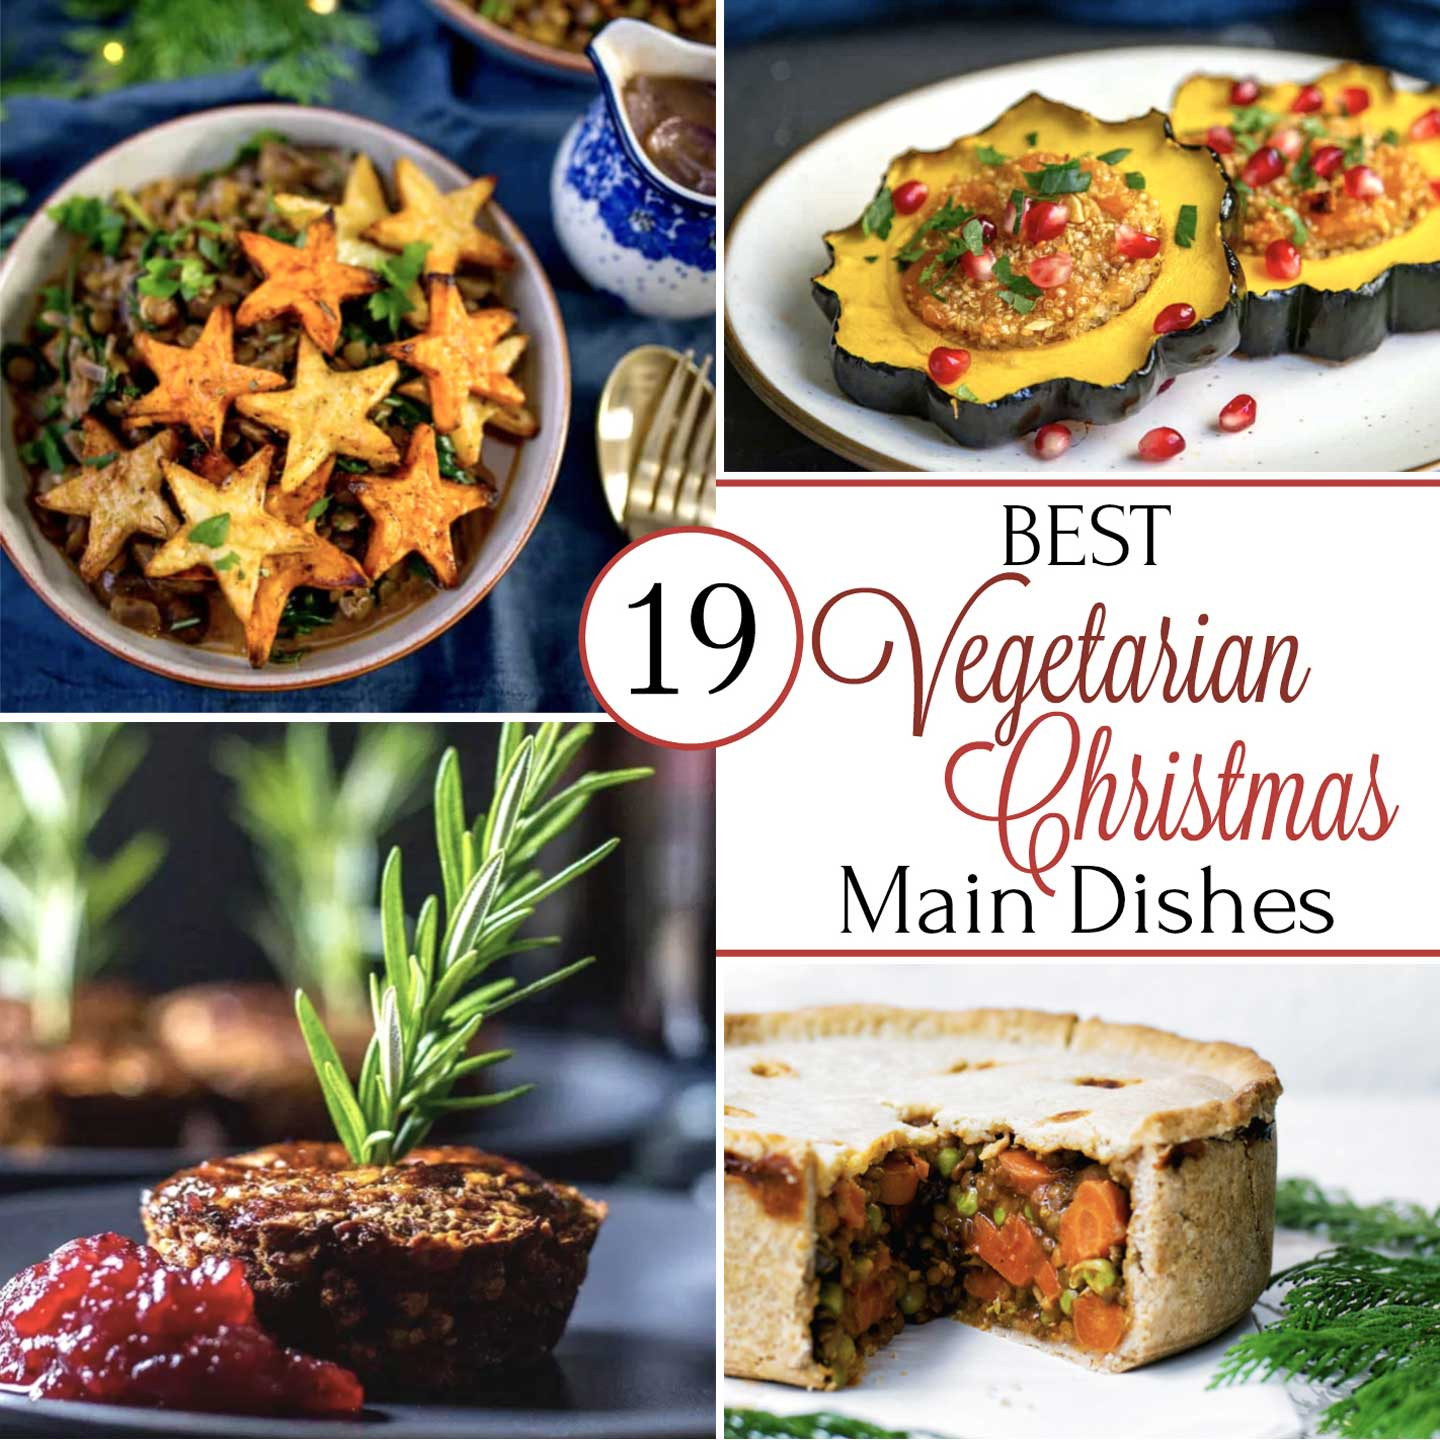 Vegetarian Main Dishes Recipes
 19 Best Christmas Ve arian Main Dish Recipes Two